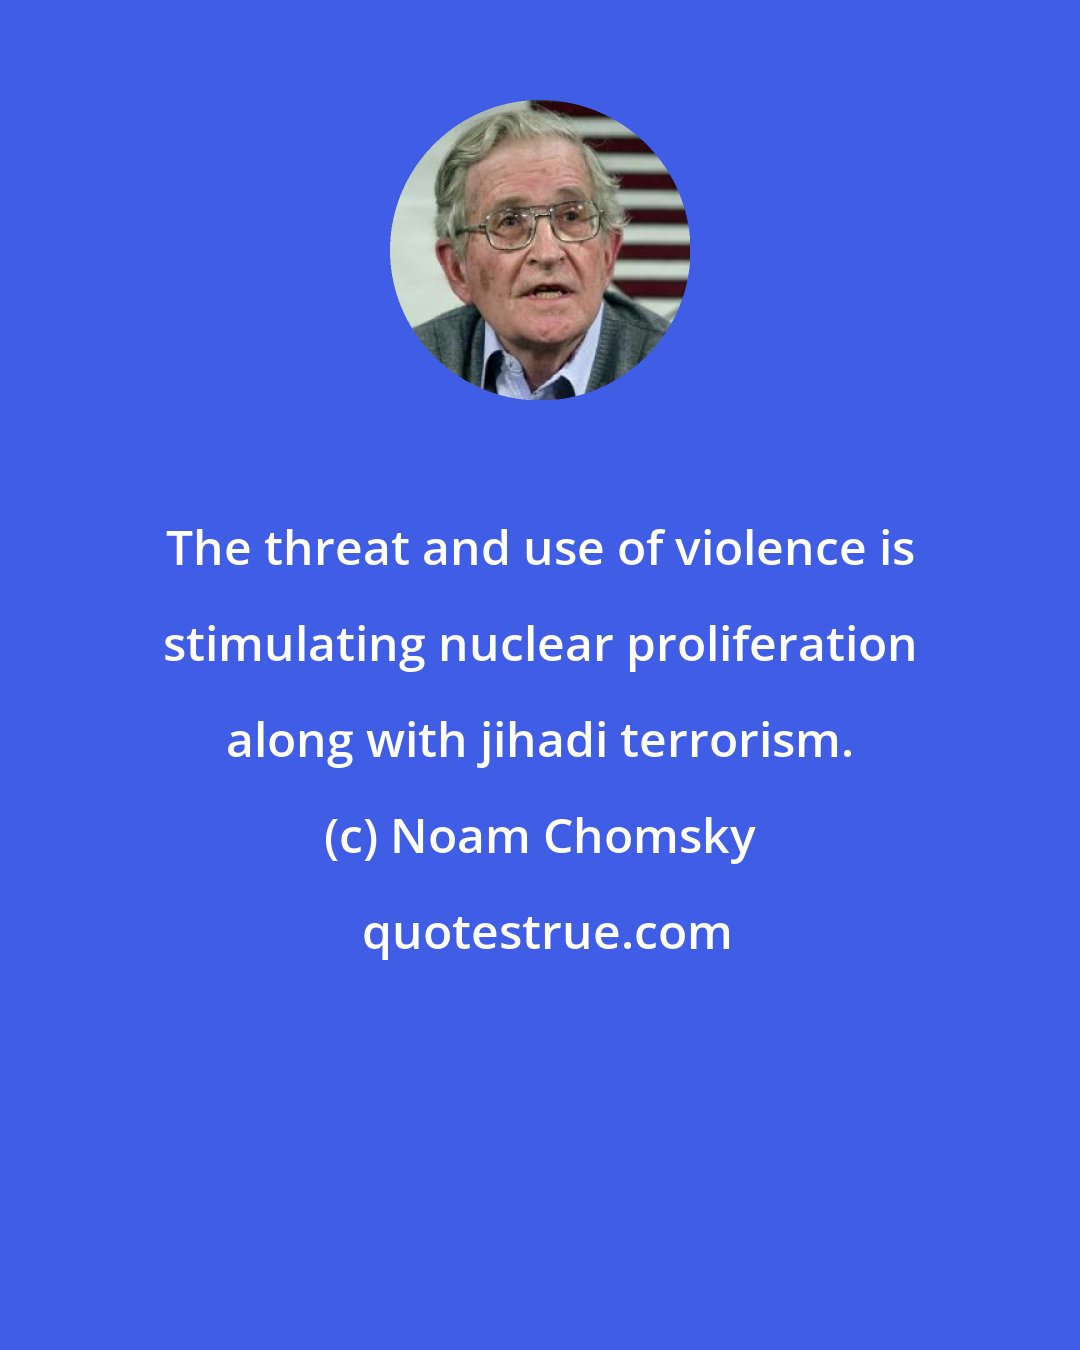 Noam Chomsky: The threat and use of violence is stimulating nuclear proliferation along with jihadi terrorism.